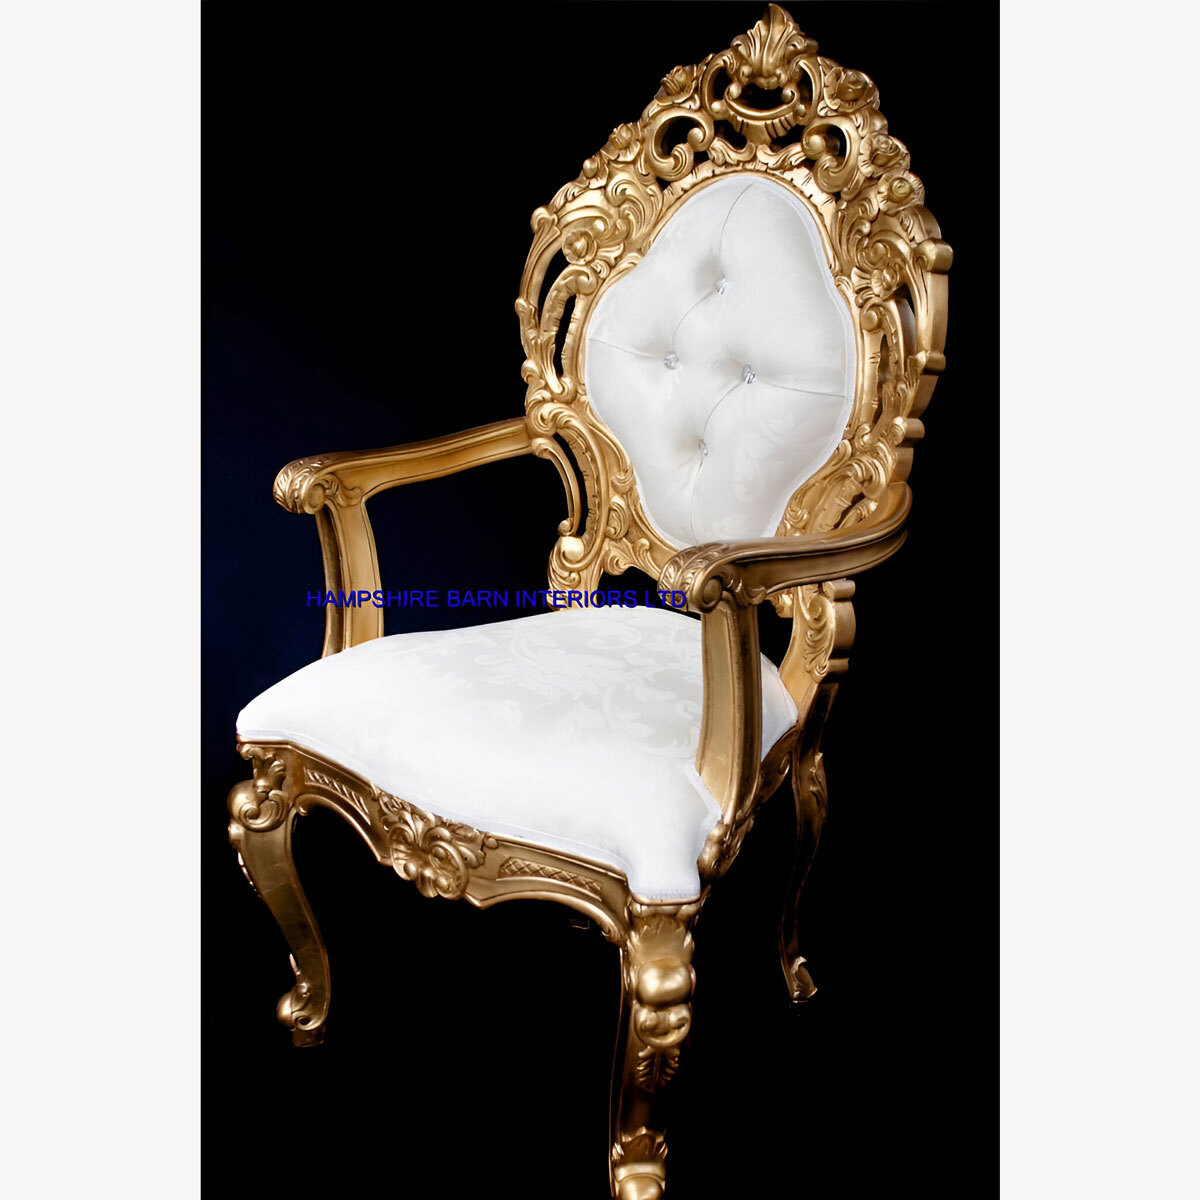 Ornate Royal Palace Throne Chair In Gold Leaf Frame And Ivory Cream Fabric 1 - Hampshire Barn Interiors - Ornate Royal Palace Throne Chair In Gold Leaf Frame And Ivory Cream Fabric -